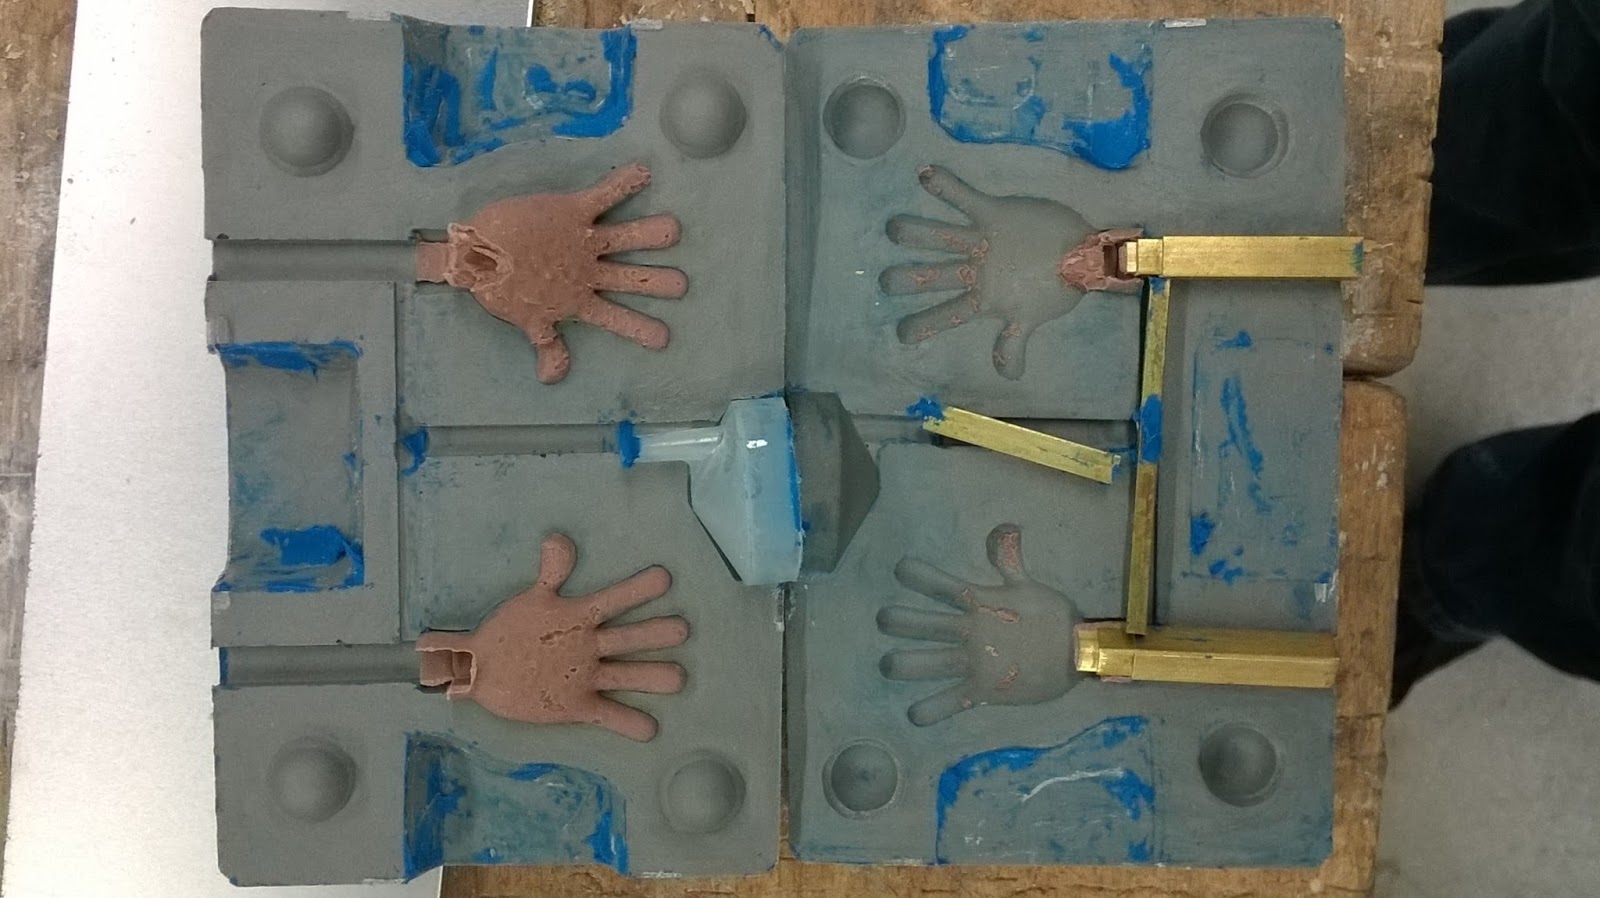 Why Plasticine is So Popular in Mould-Making